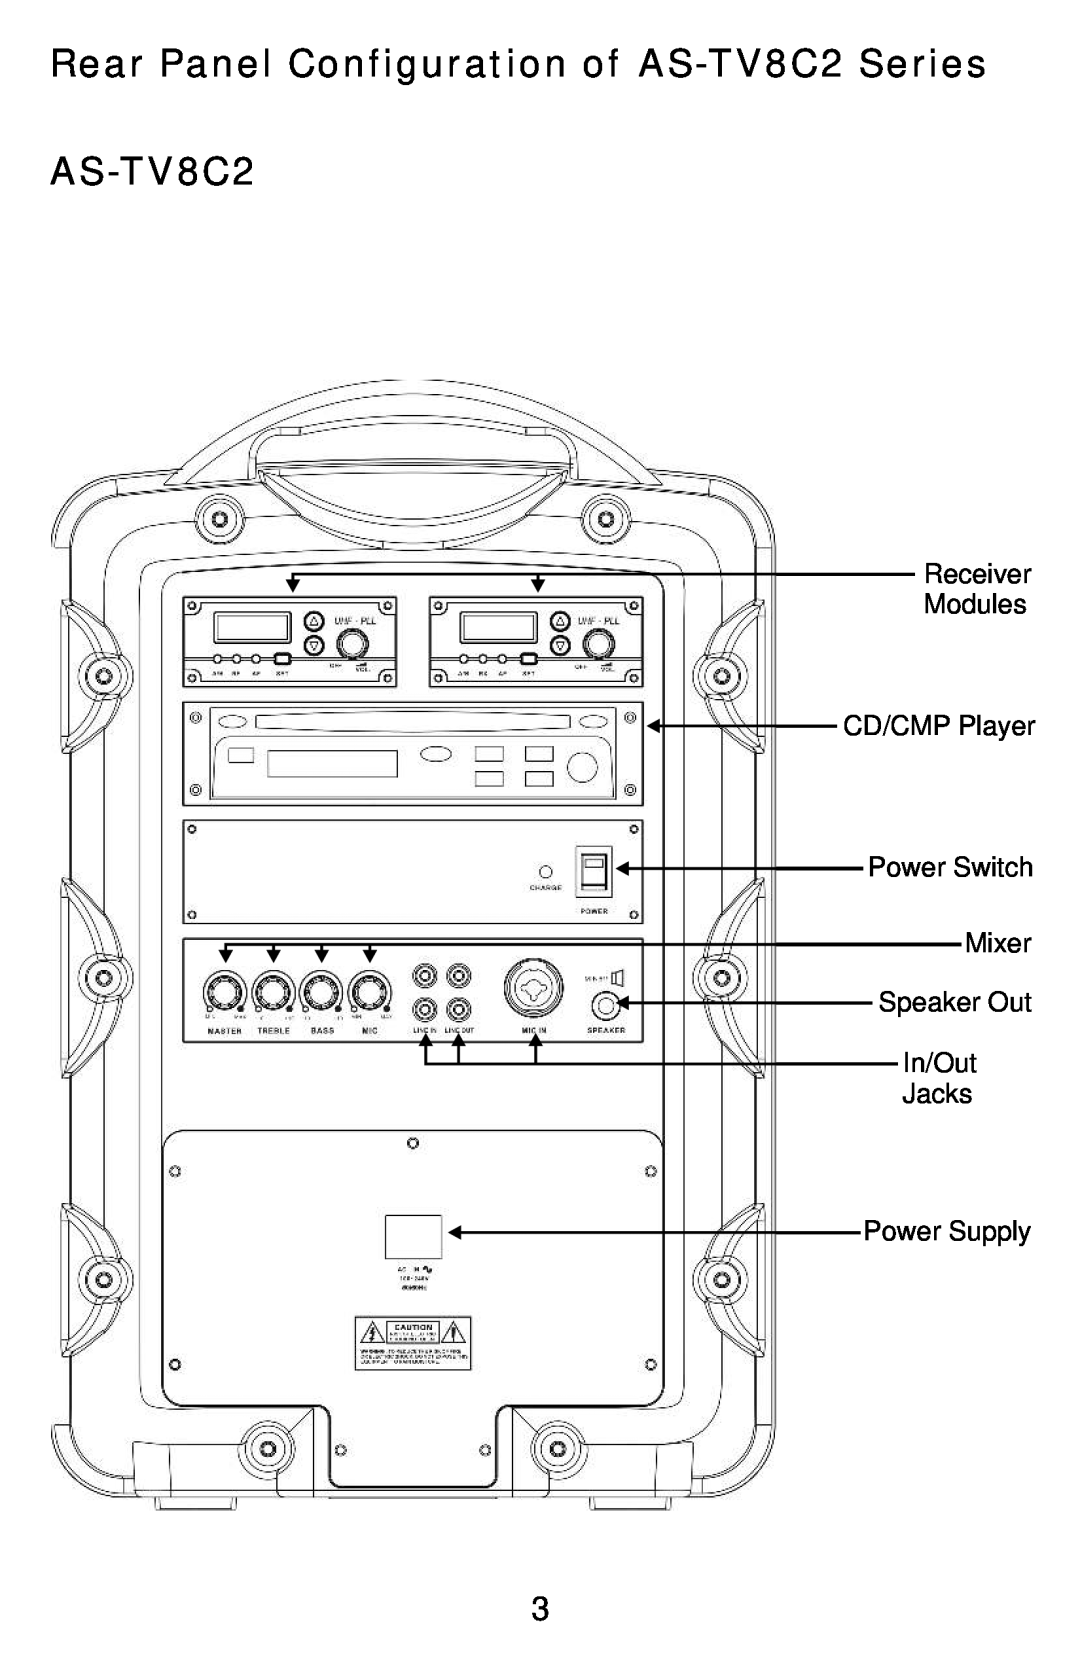 Traveler manual Rear Panel Configuration of AS-TV8C2Series, Receiver Modules CD/CMP Player Power Switch Mixer 